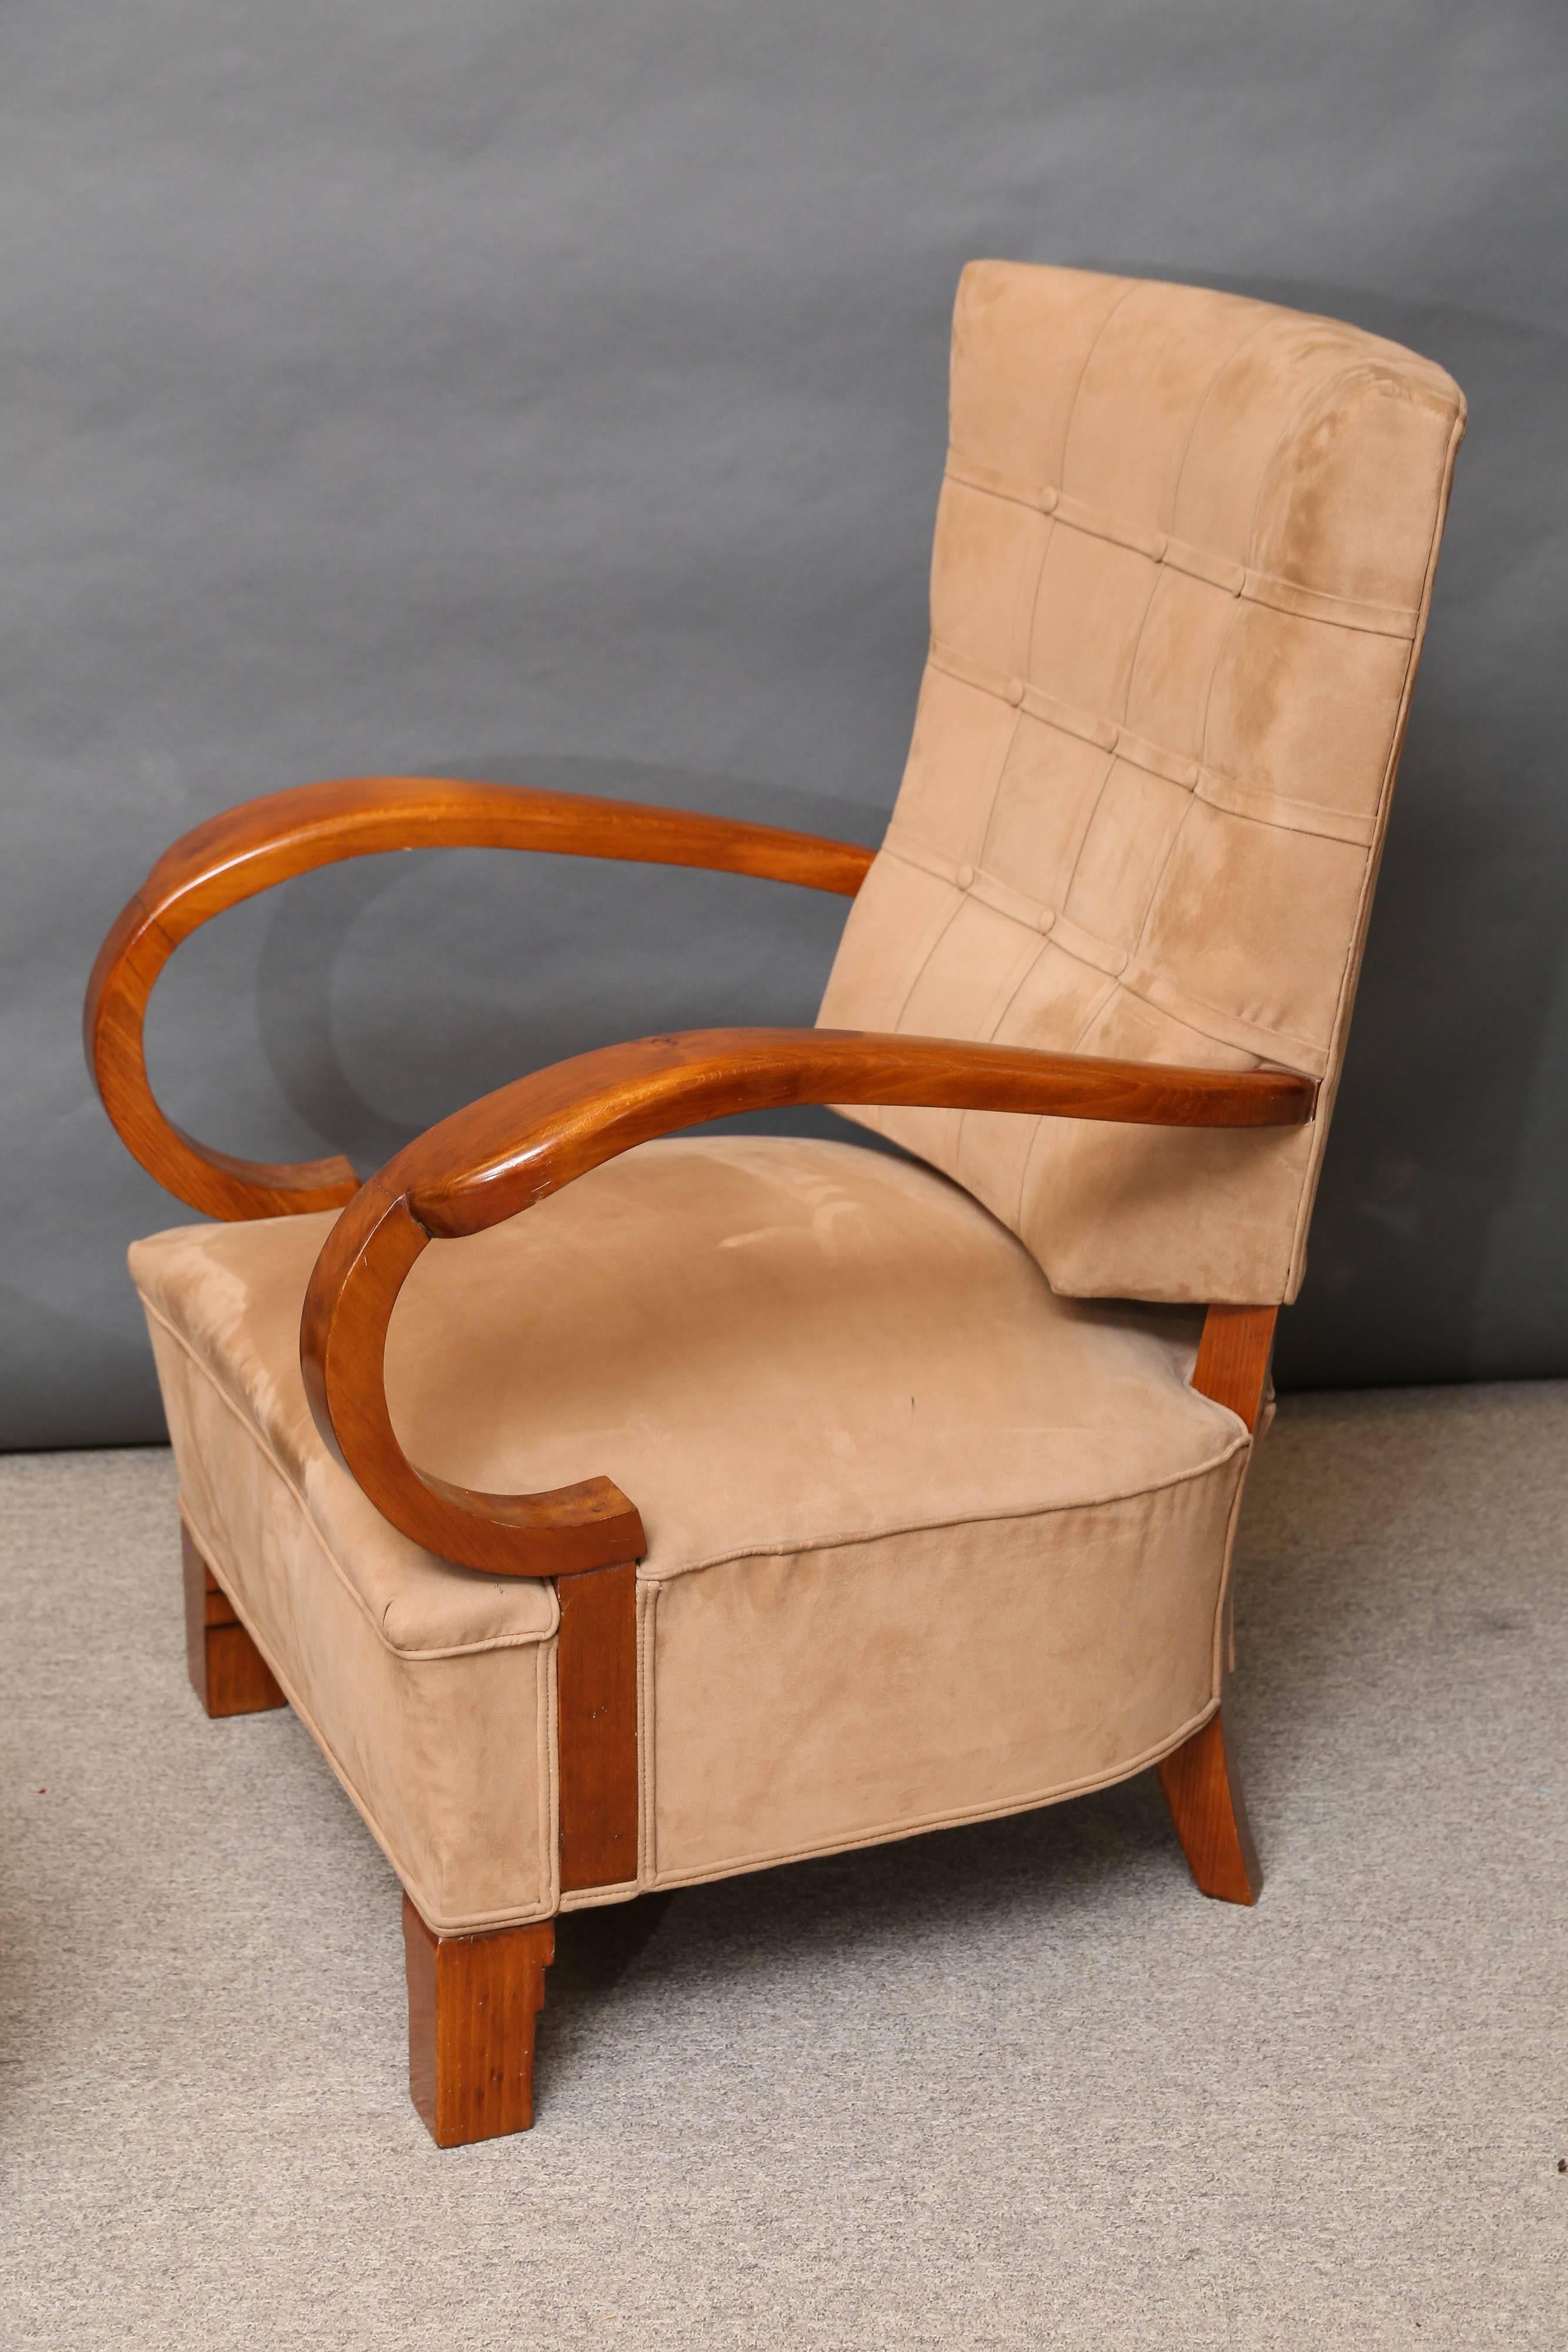 Very comfortable and wide chair is newly re-upholstered in the sand color velvety fabric.
Body of the chair is made out of walnut wood and covered with French polish. Chair is elevated by four short square legs. Back of the chair is covered with